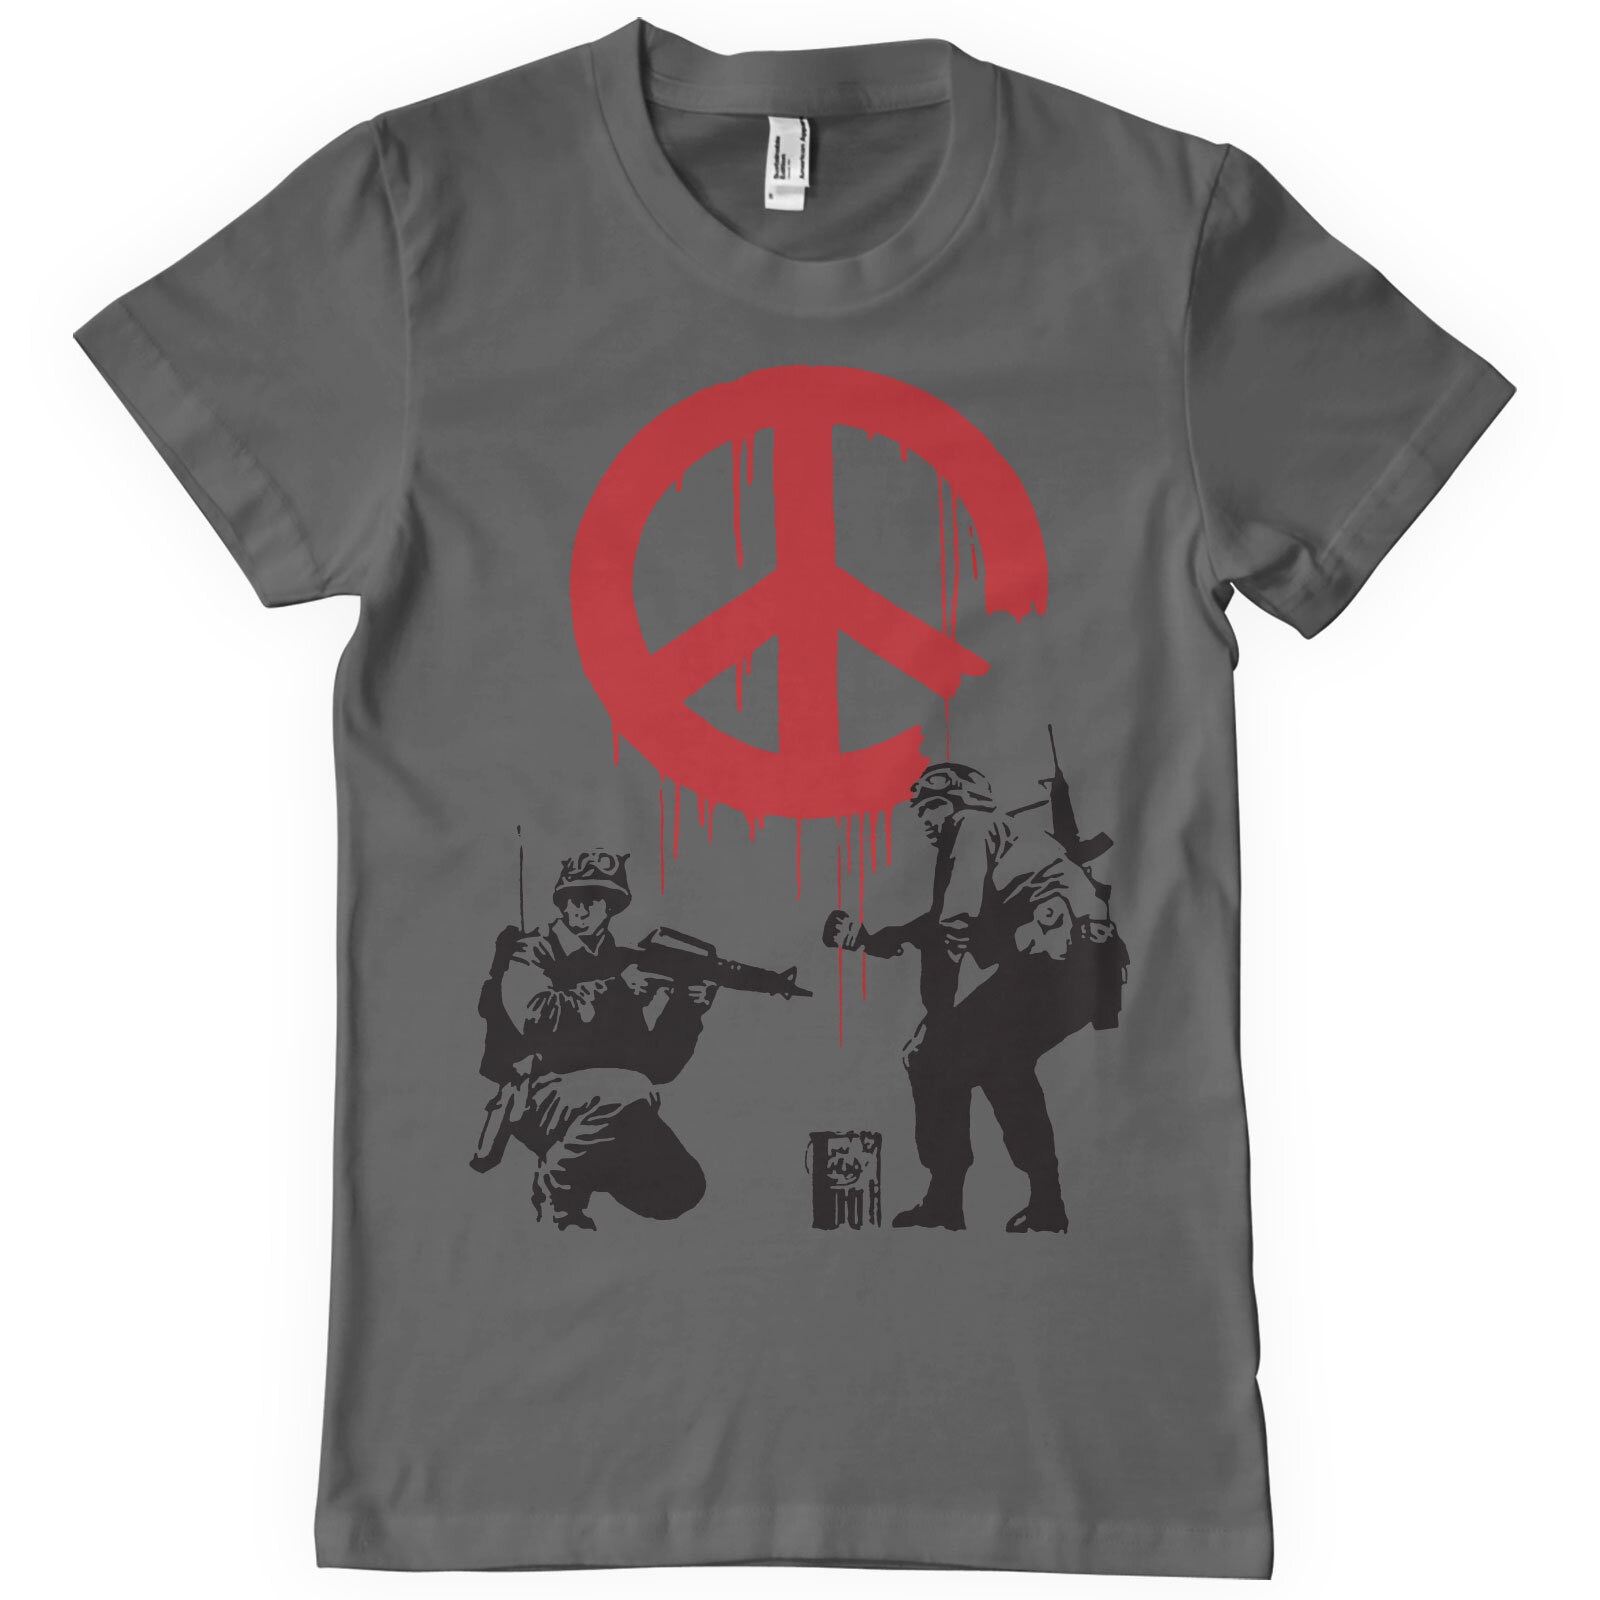 Soldiers Painting CND Sign T-Shirt